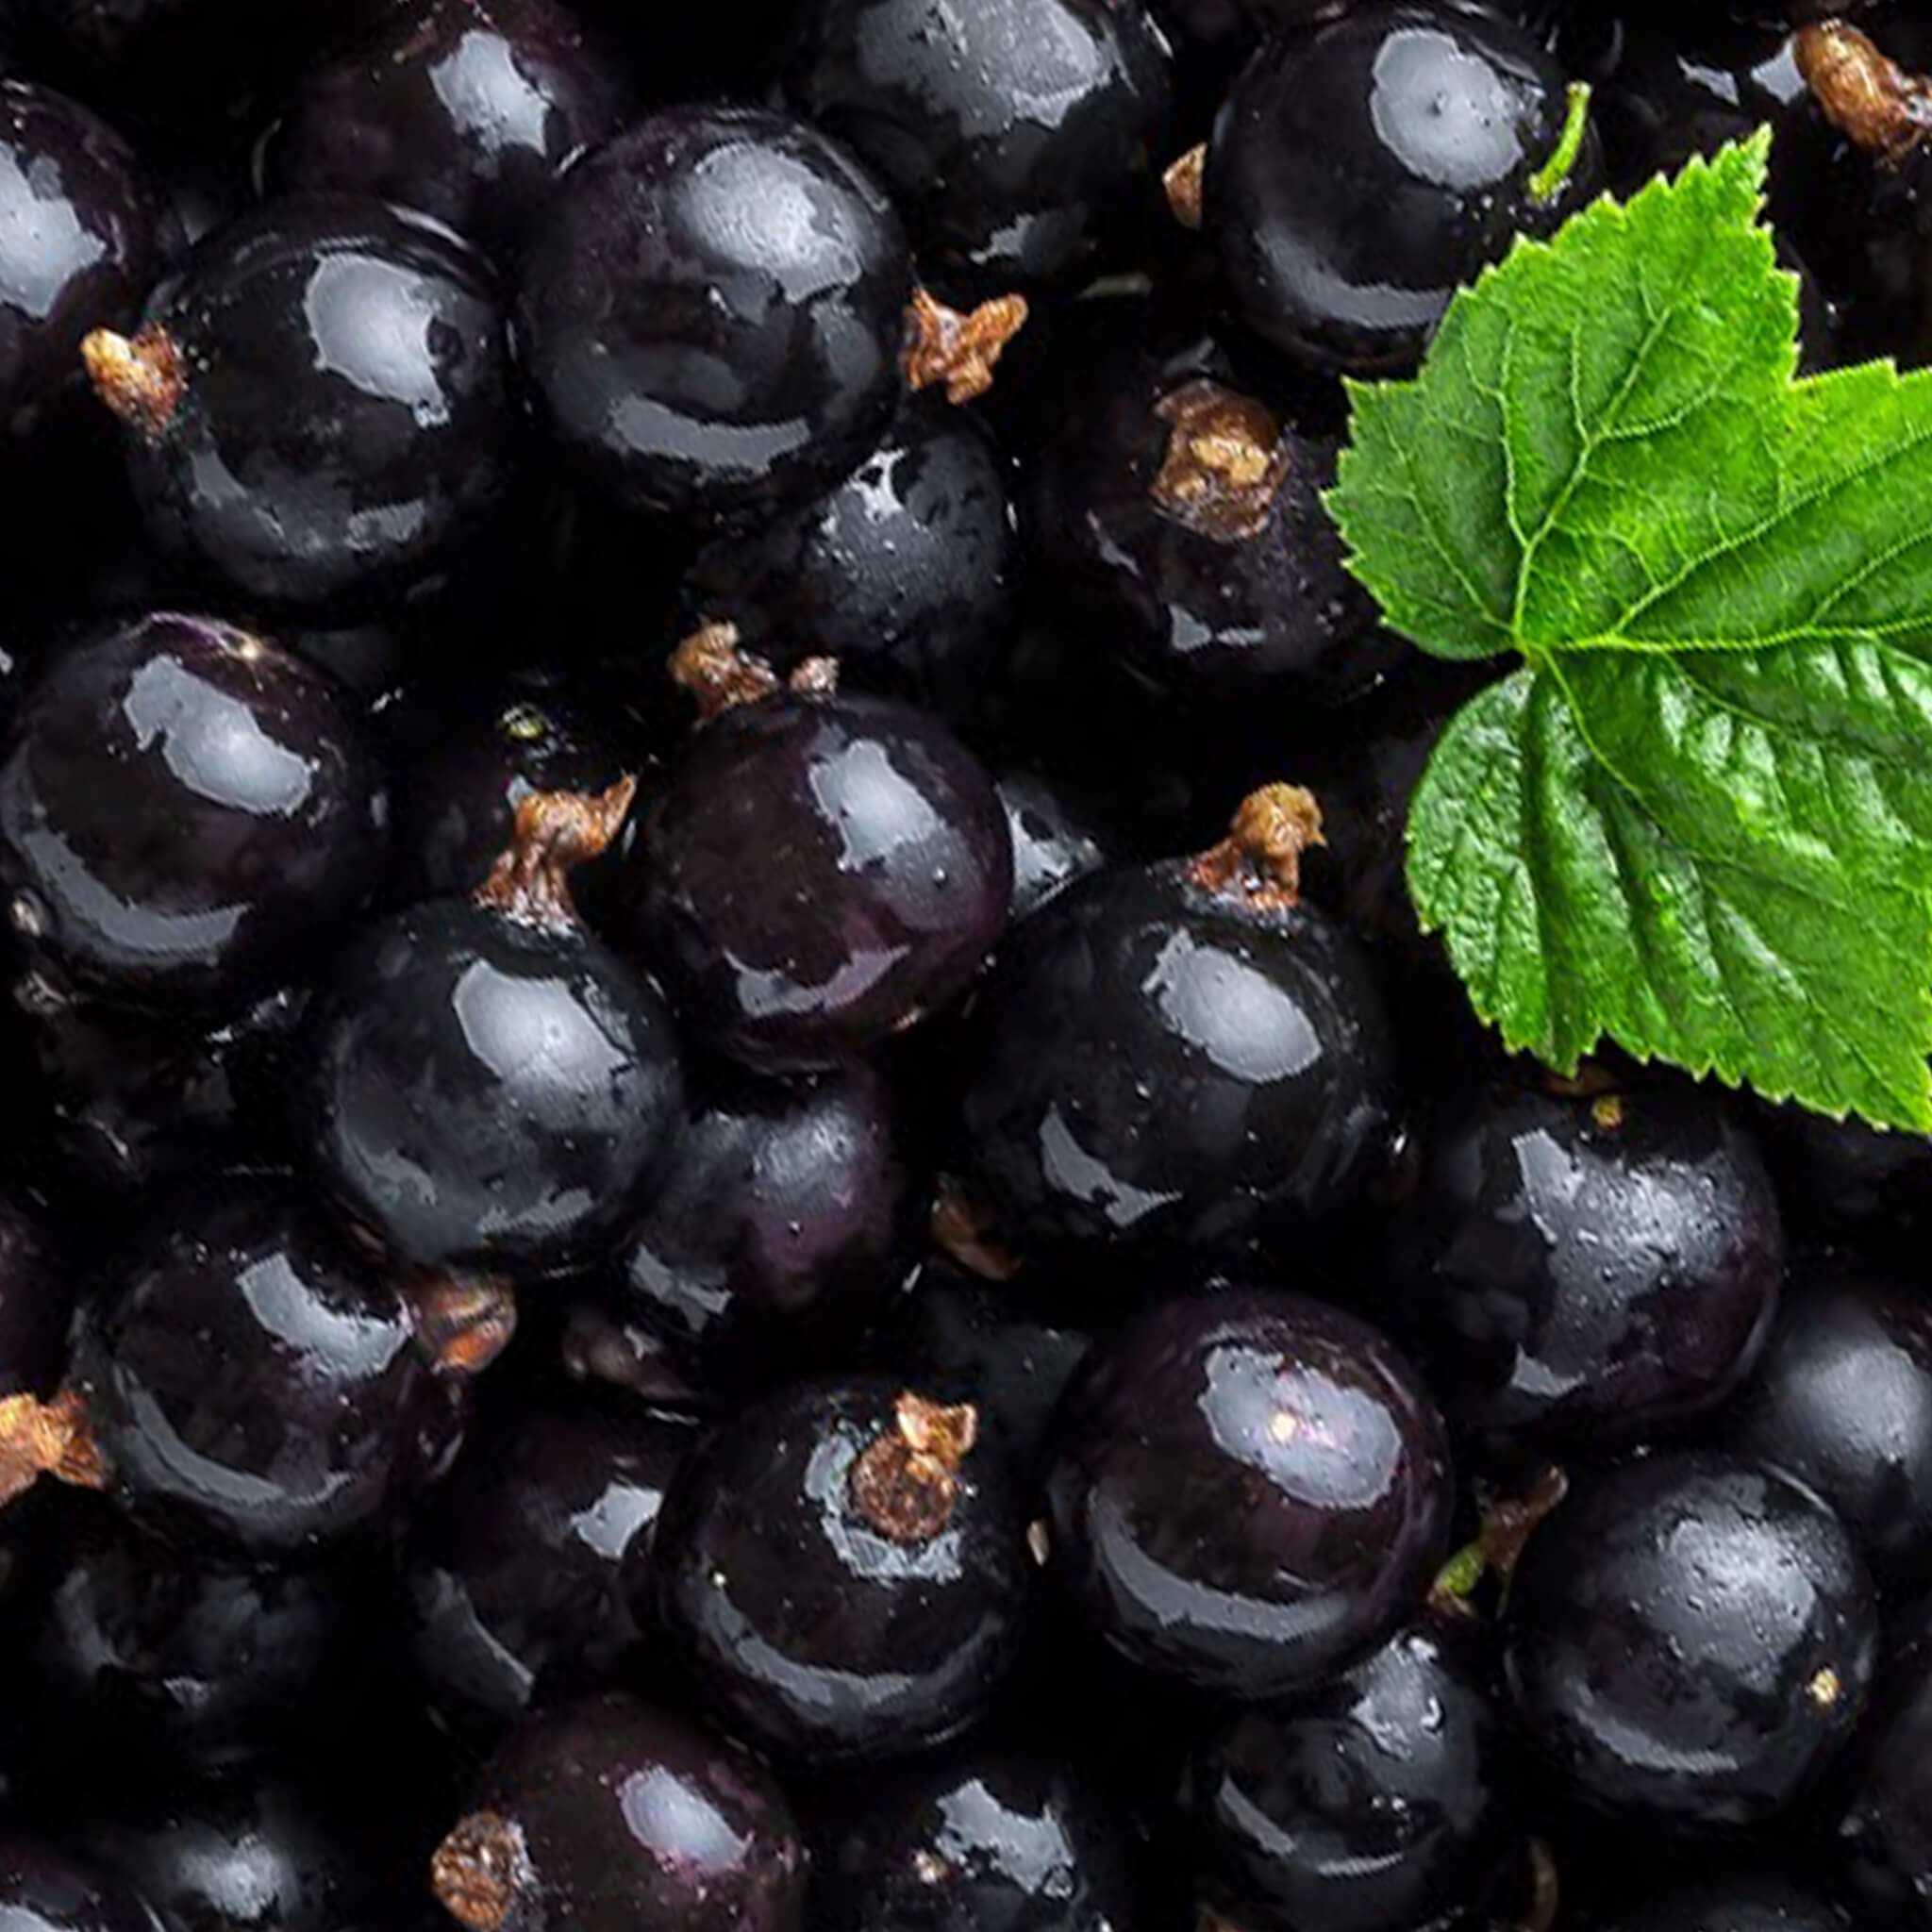 Product Page Key Ingredients: Blackcurrant Oil